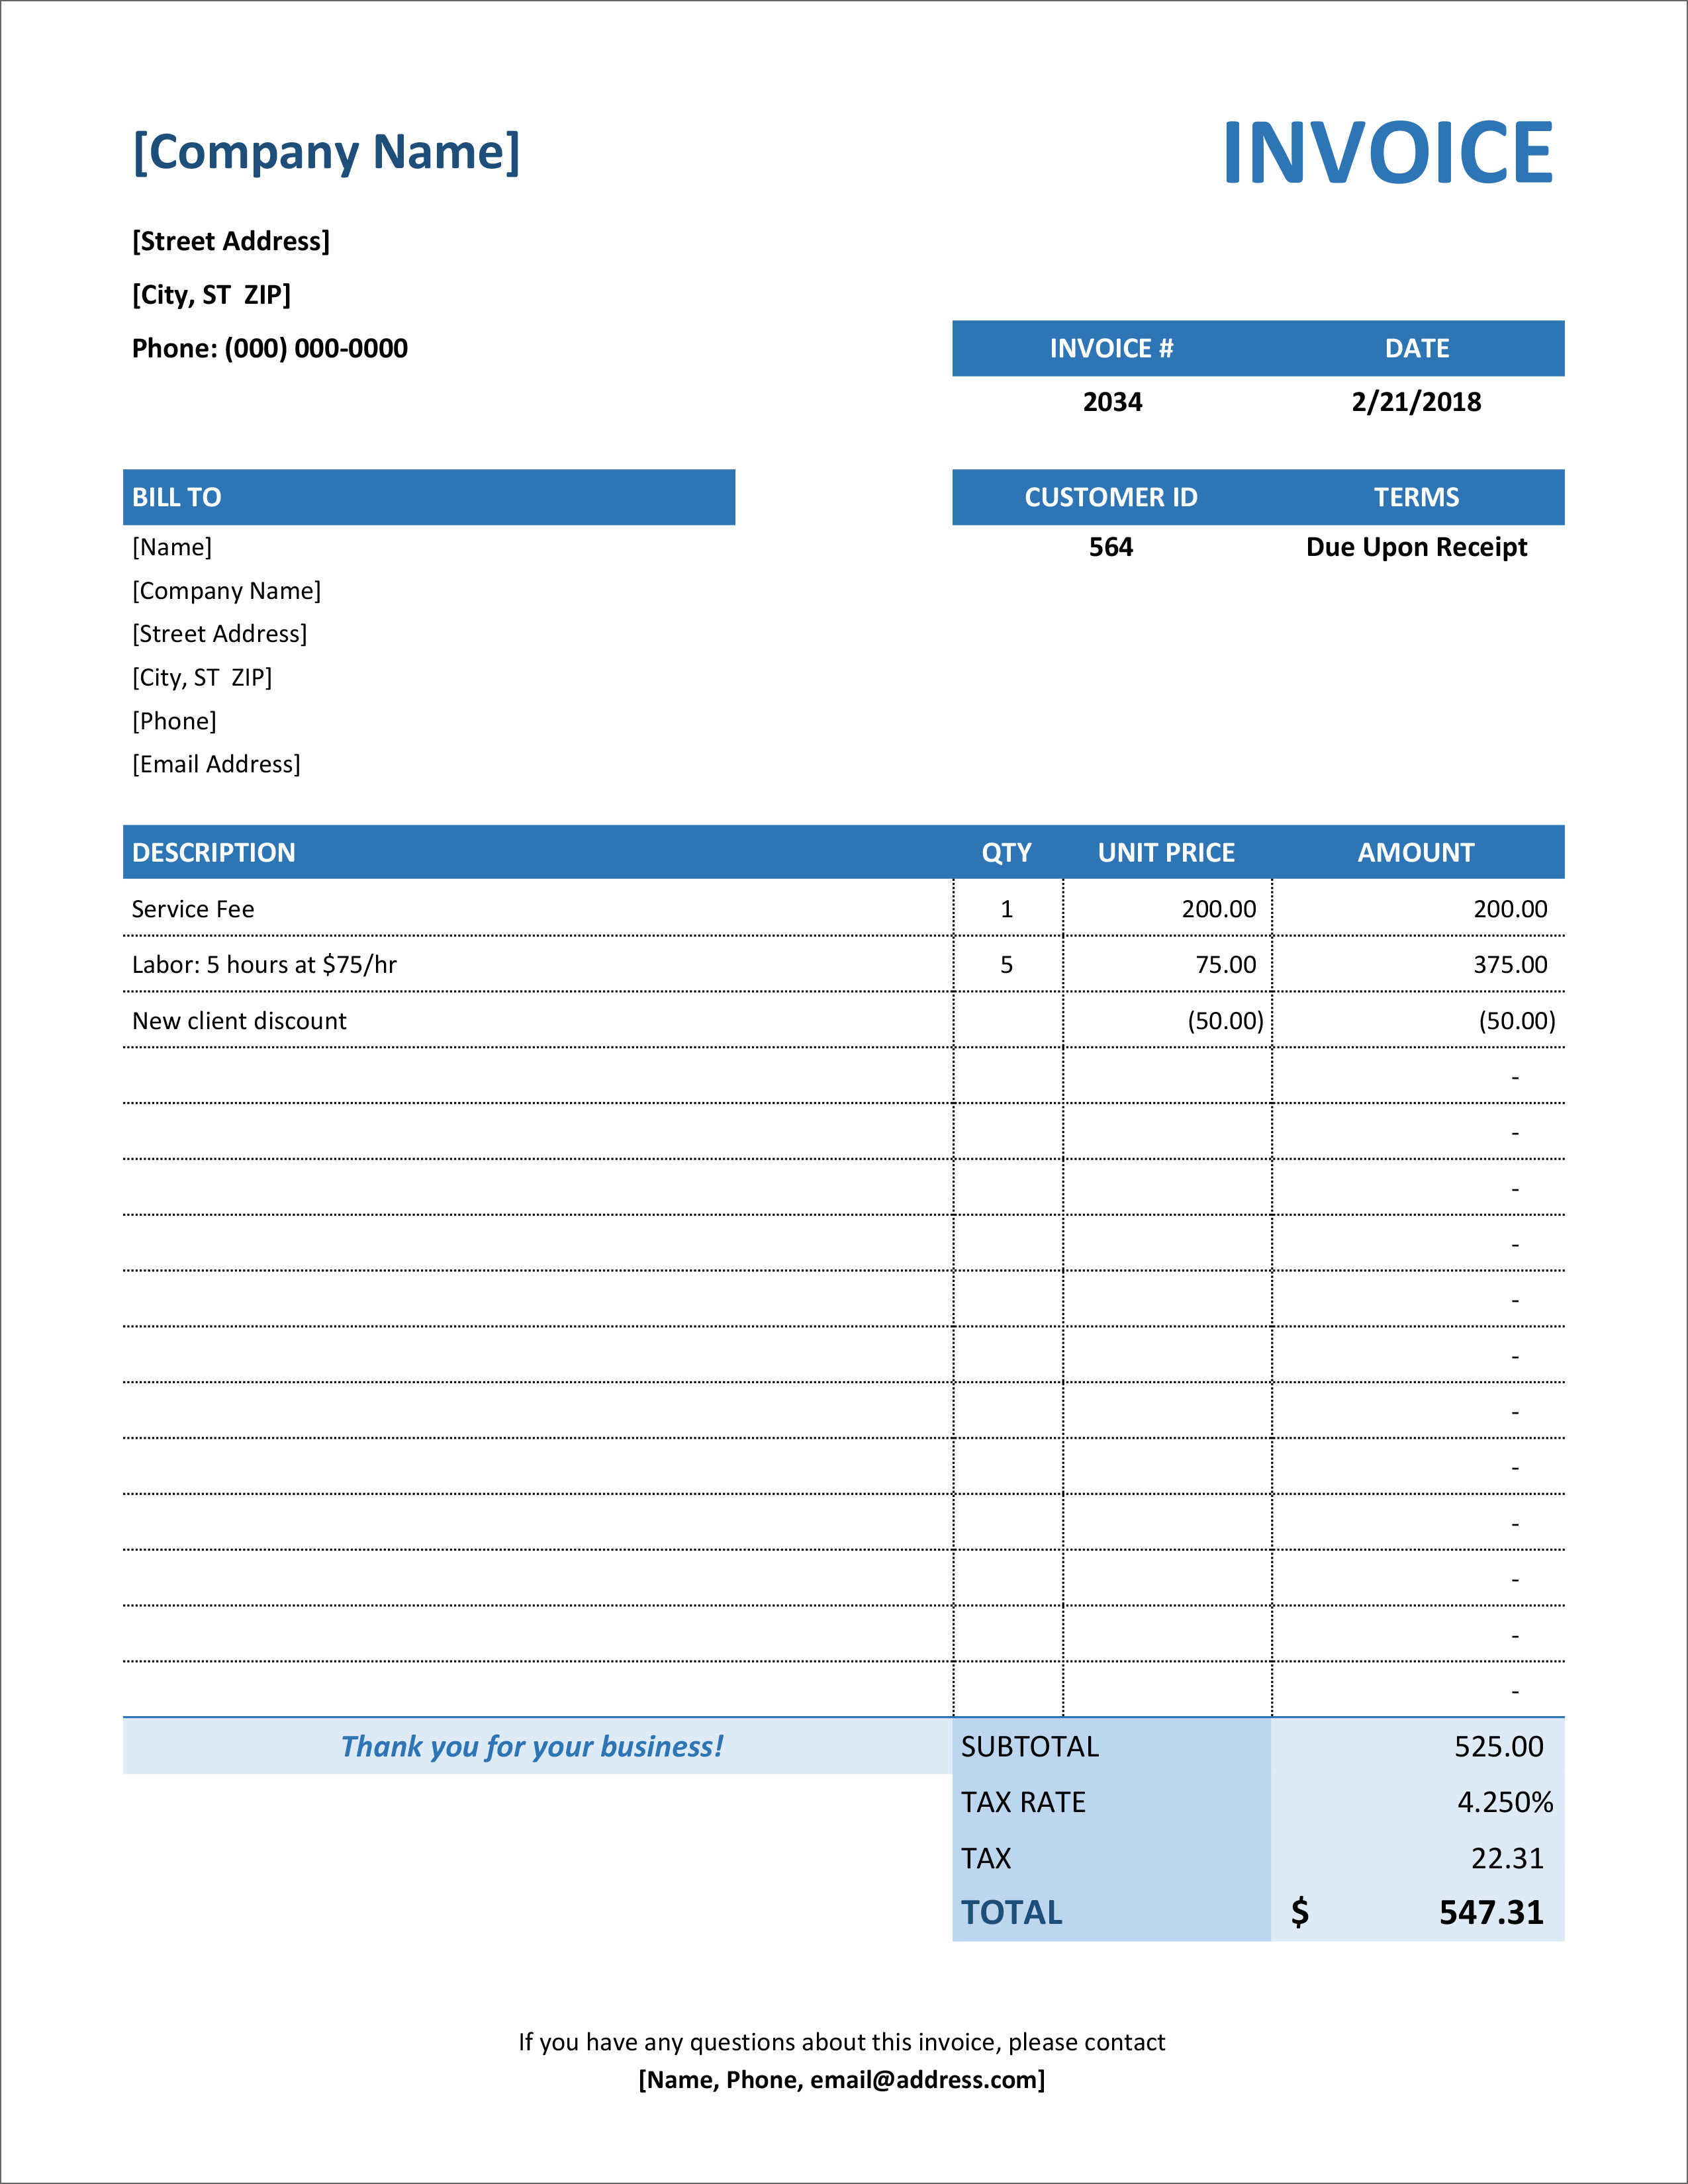 22 Free Invoice Templates In Microsoft Excel And DOCX Formats With Microsoft Office Word Invoice Template